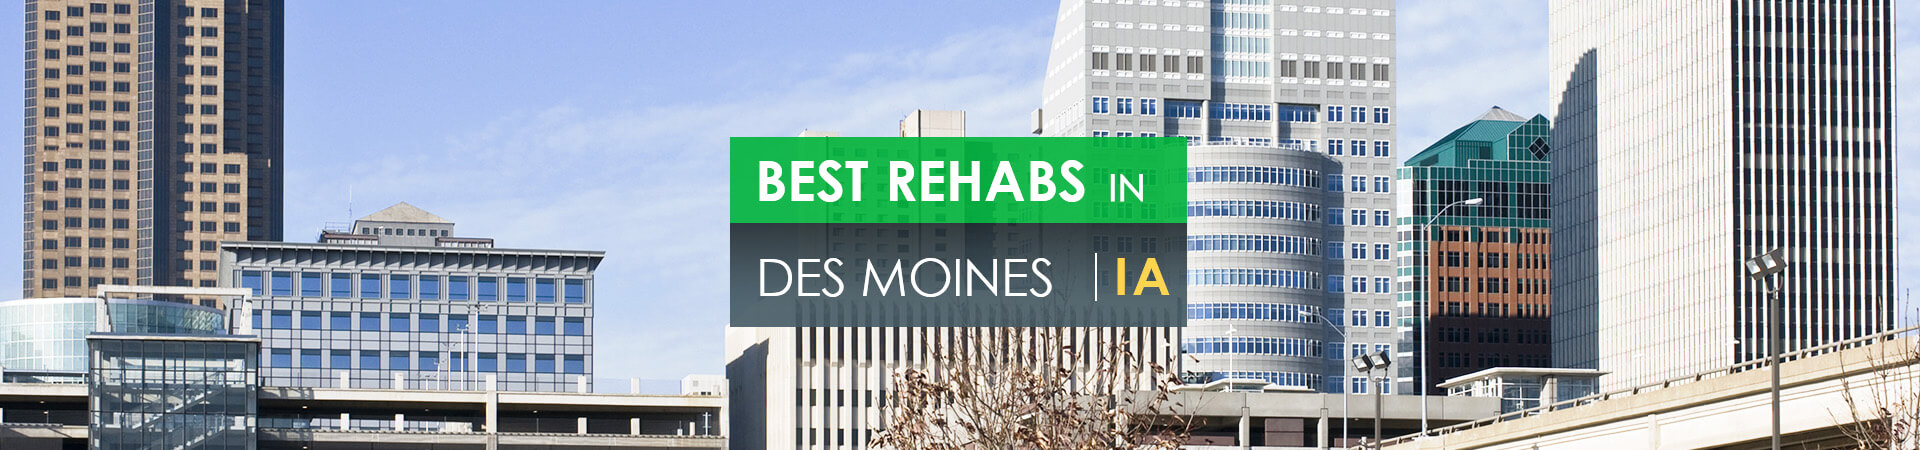 Best rehabs in Des Moines, IA